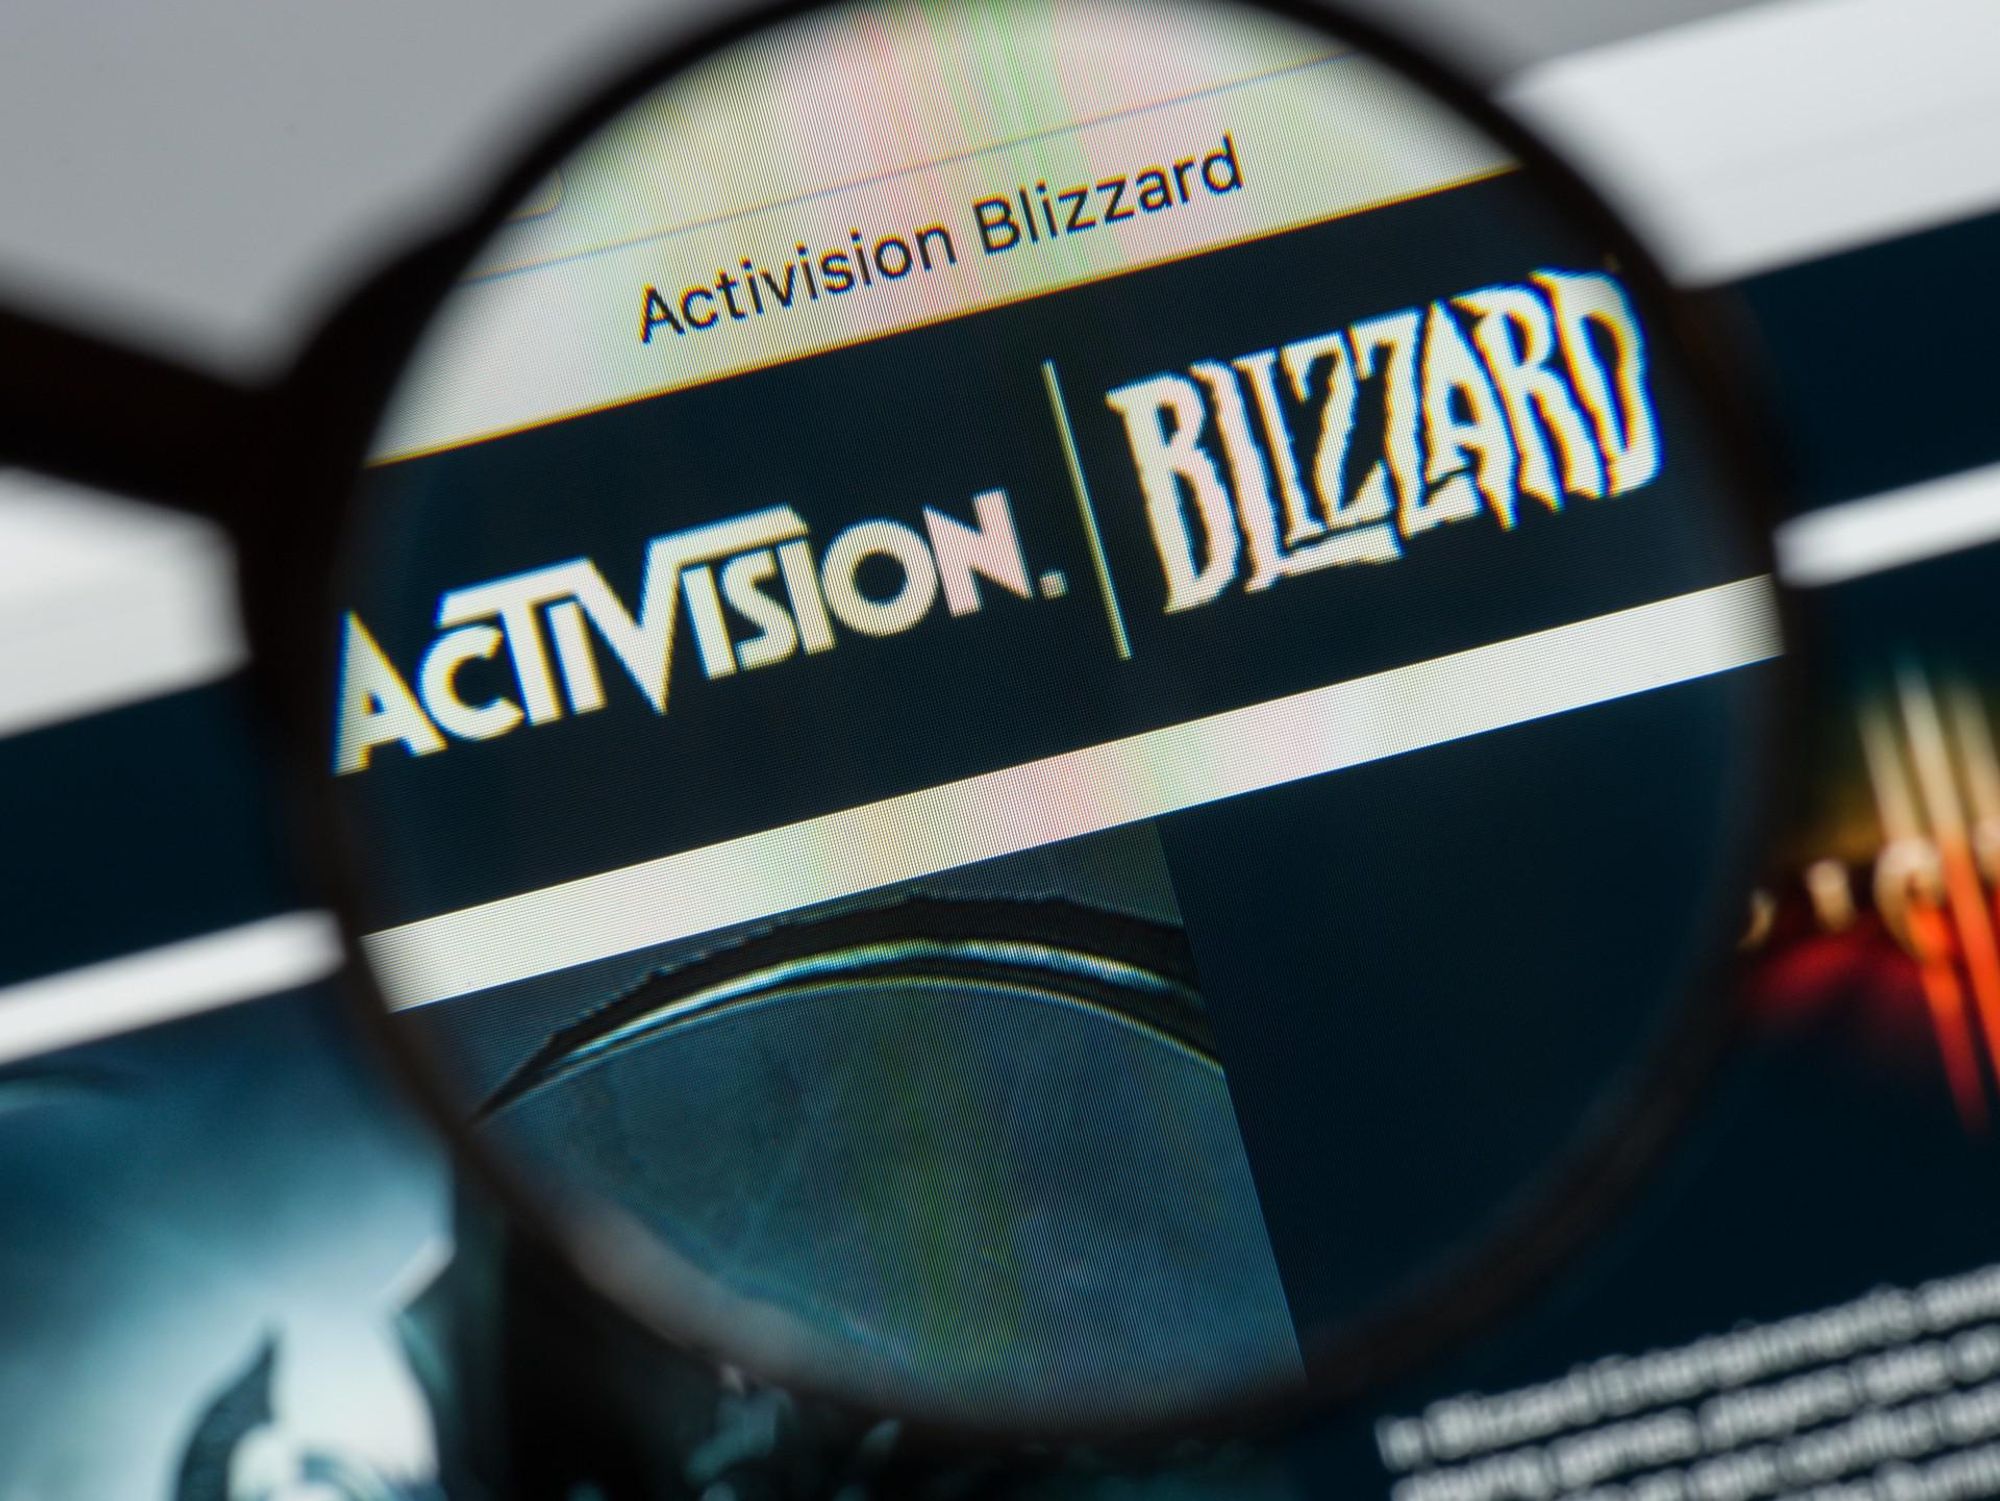 Activision Blizzard Employees Set to Walkout on Wednesday